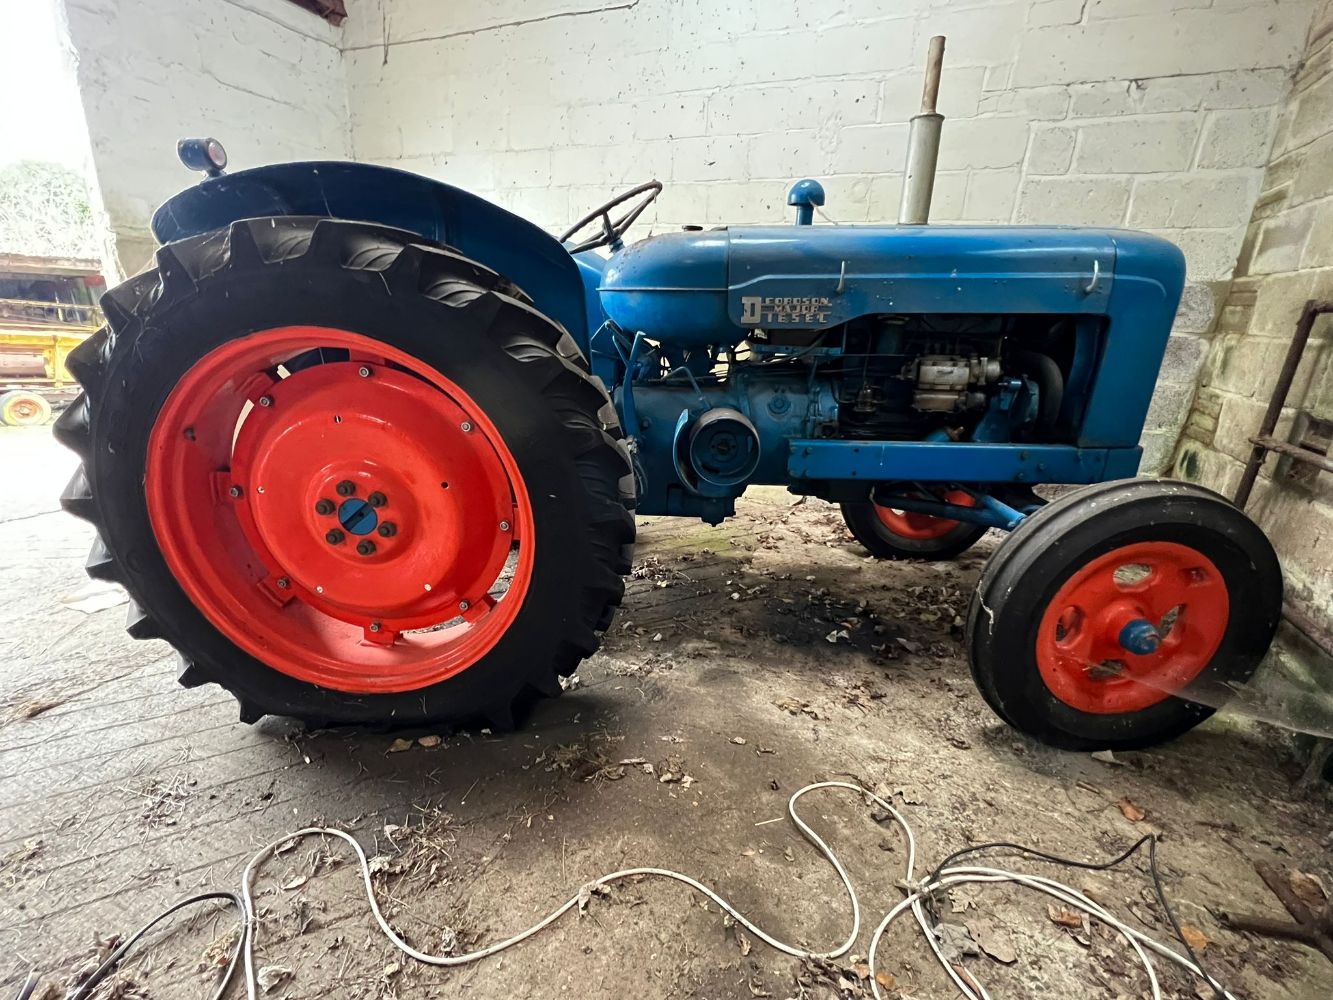 The Somerset Collective Vintage Tractor & Farm Machinery No Reserve Sale - Timed Online Only Auction